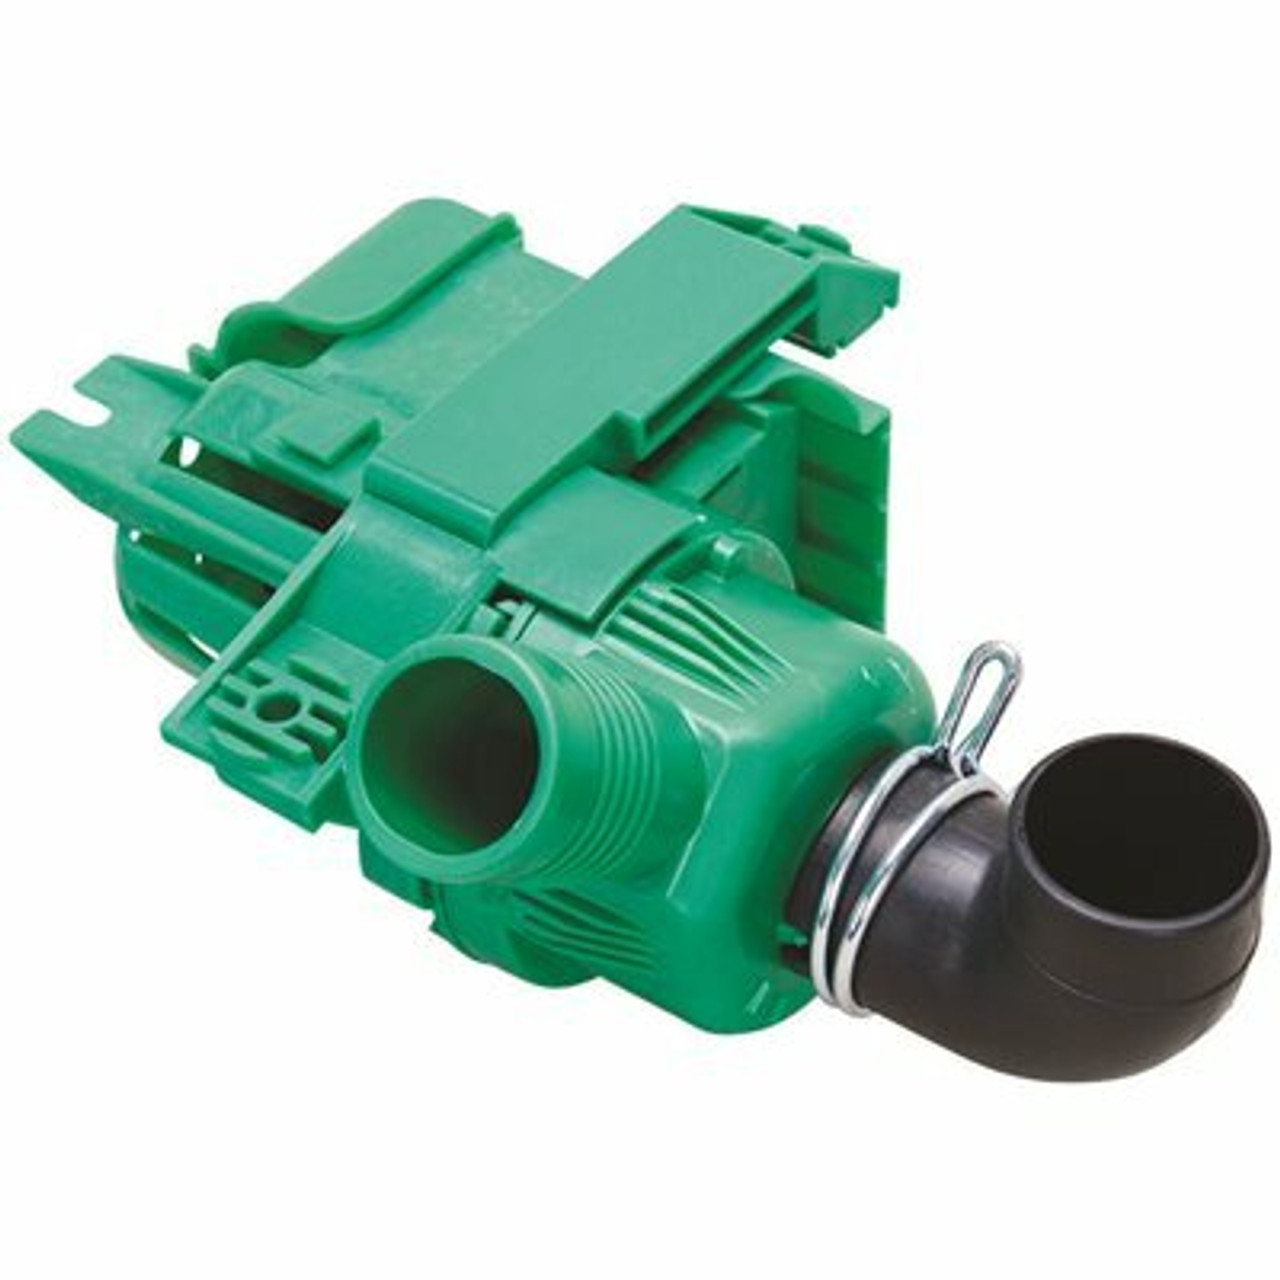 Exact Replacement Parts Washer Pump Replacement For Whirlpool - 3577480